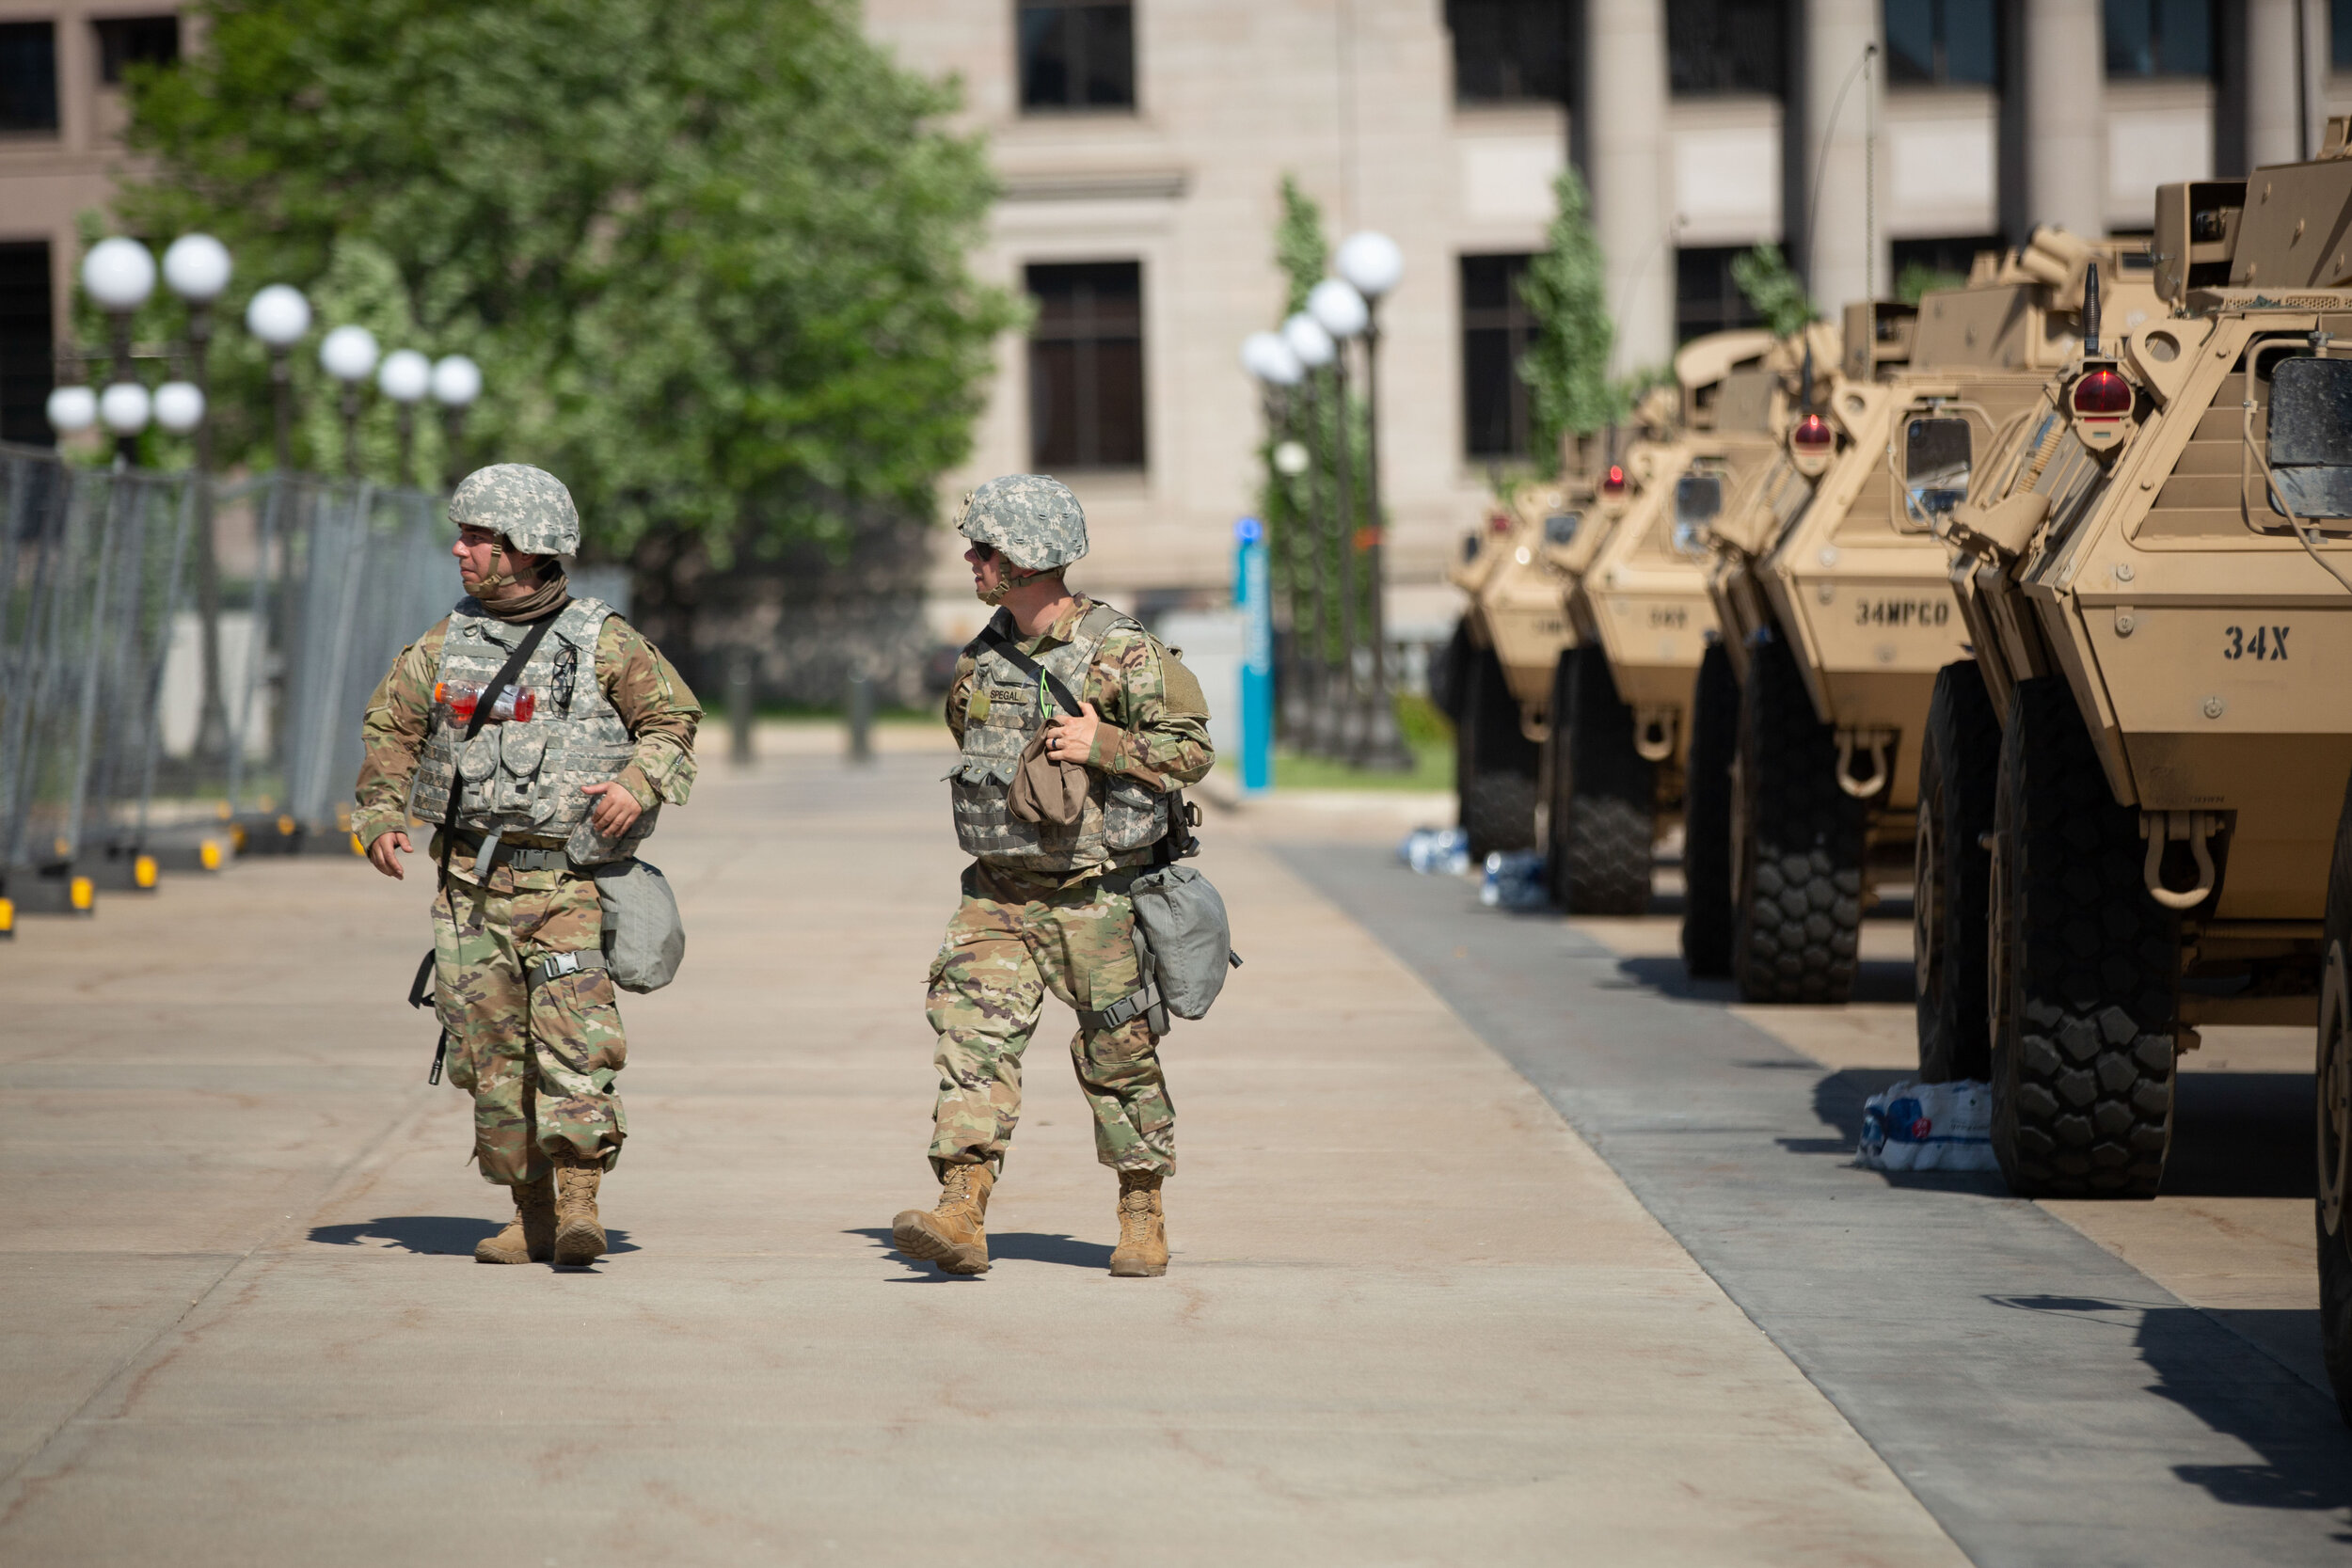  Two National Guard soldiers walk down a line of armored vehicles in front of the Minnesota State Capitol in Saint Paul, Minnesota on June 1, 2020. Chris Juhn/Zenger 